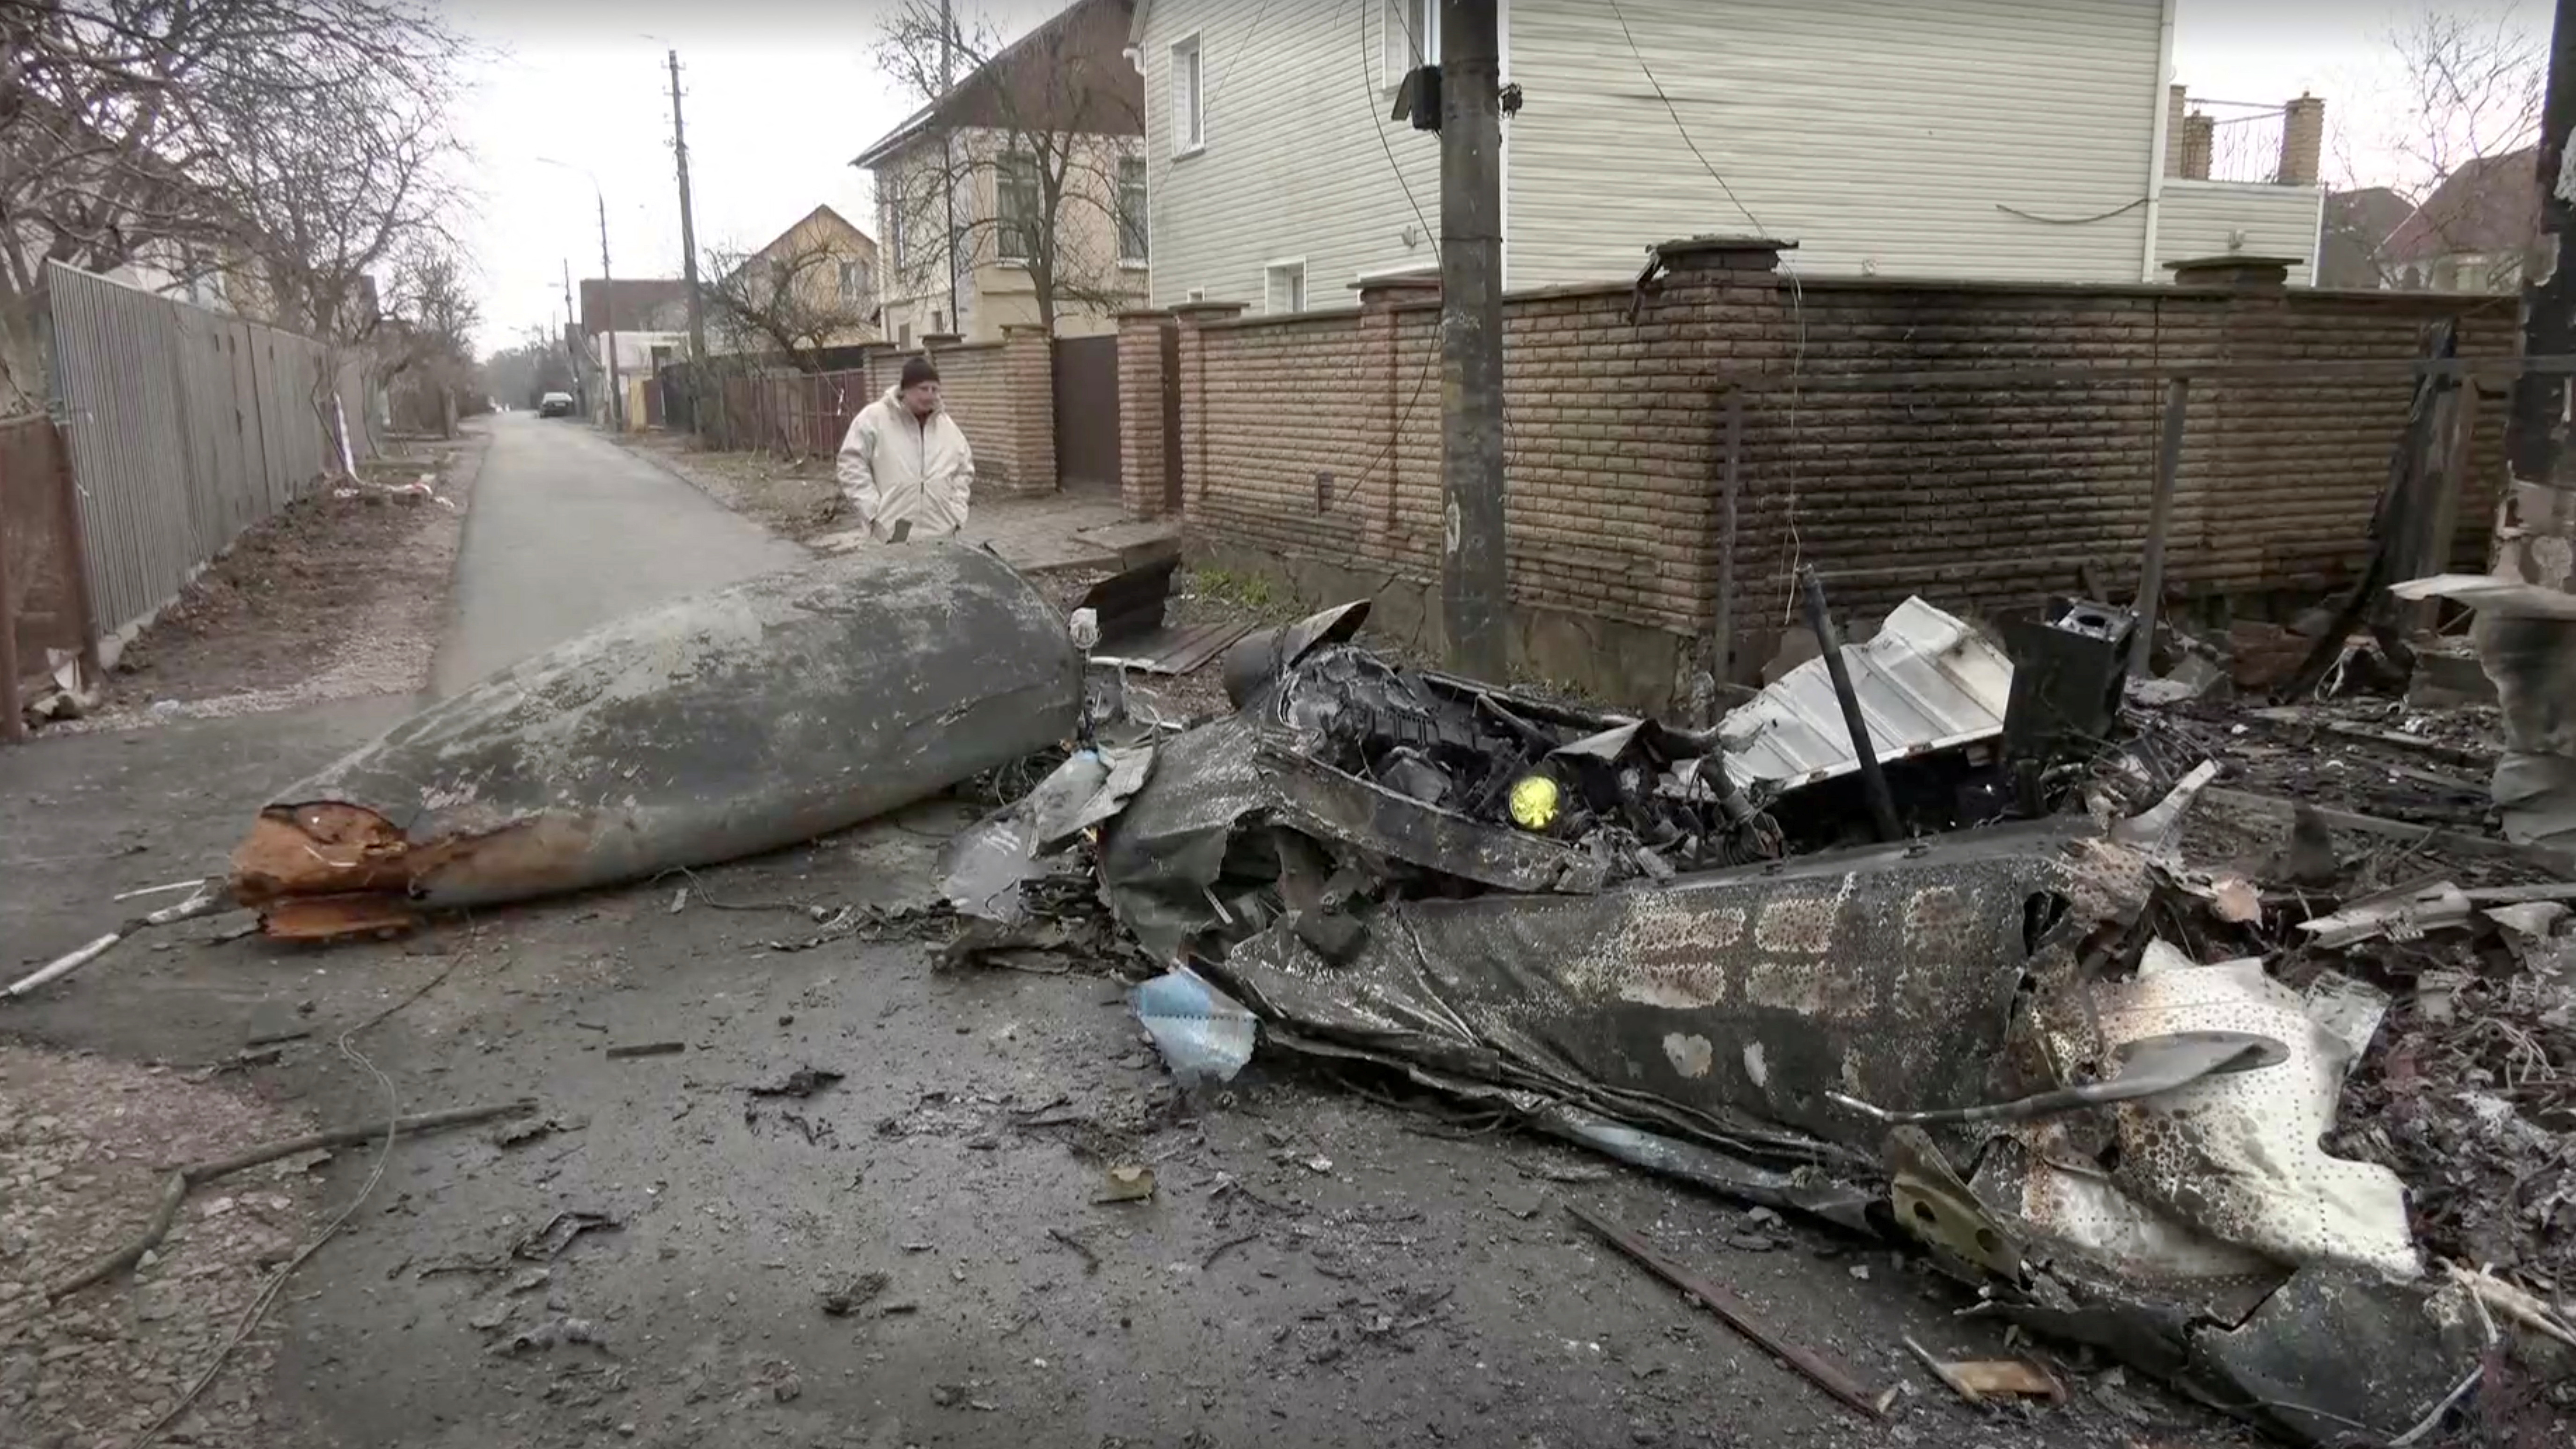 Screengrab from video shows a person inspecting the wreckage of an unidentified aircraft that crashed into a house in a residential area, after Russia launched a massive military operation against Ukraine, in Kyiv February 25, 2022. Reuters TV via REUTERS